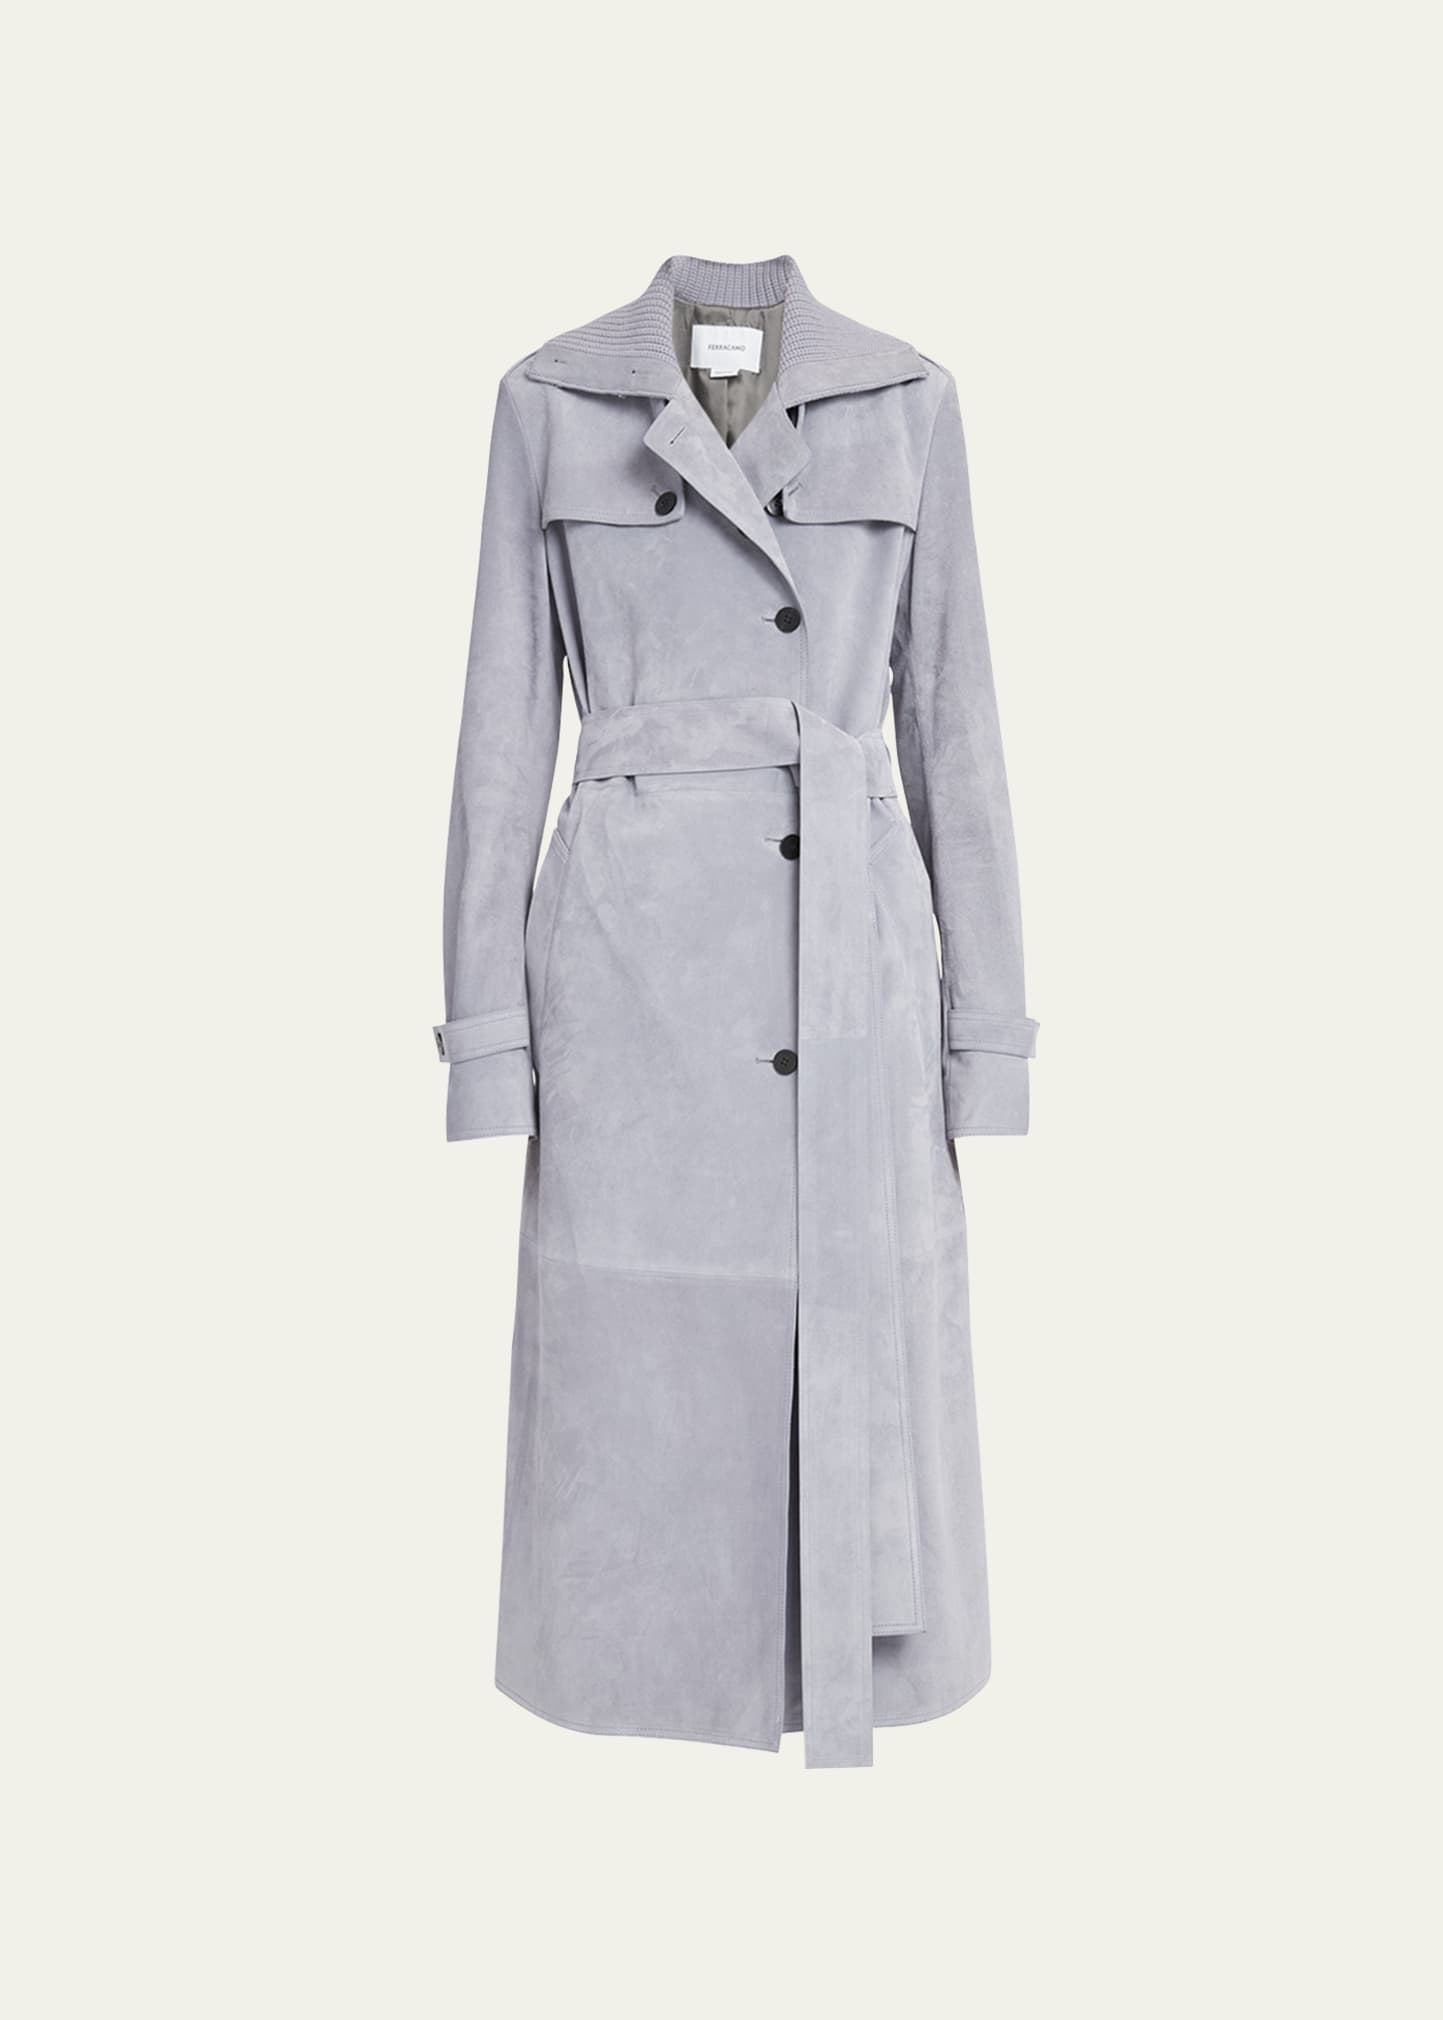 Suede Leather Belted Trench Coat